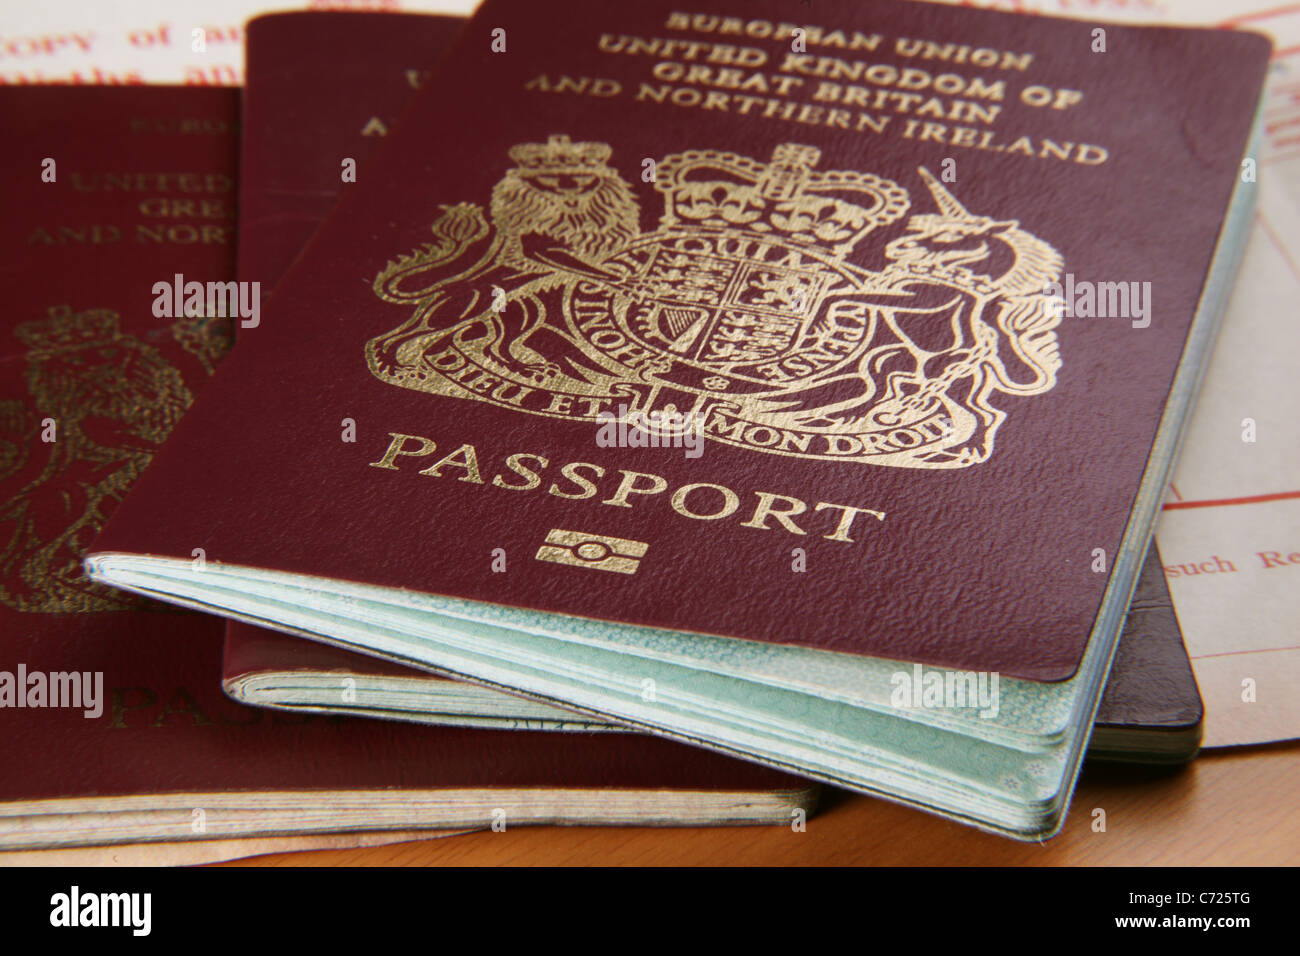 UK Passports; Forgeries and Illegal Immigration concept Stock Photo